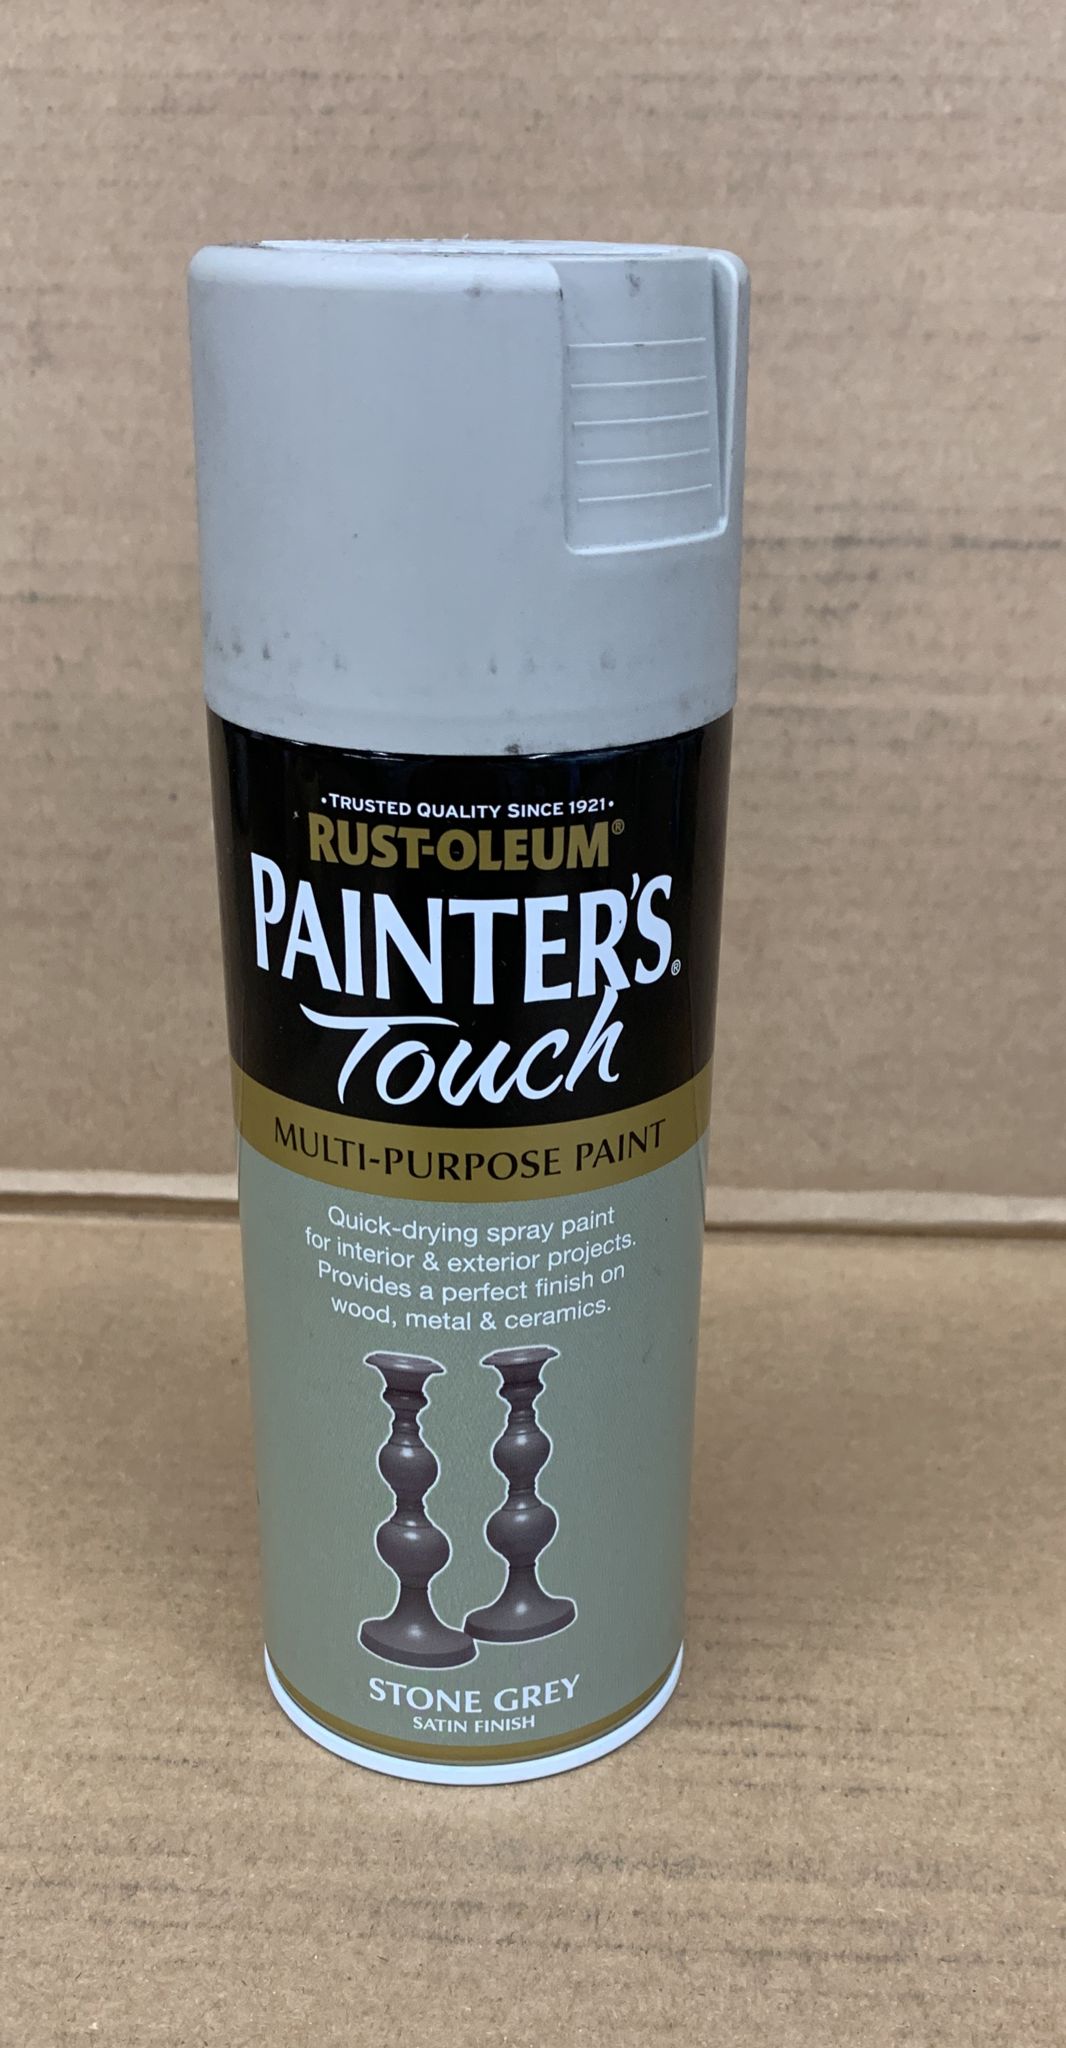 Rust-Oleum Painter's Touch Stone grey